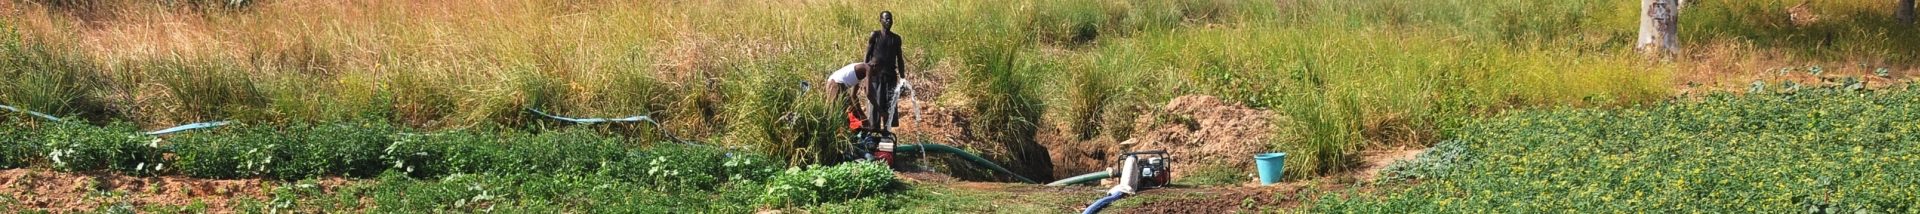 Project : Groundwater in sub-Saharan Africa